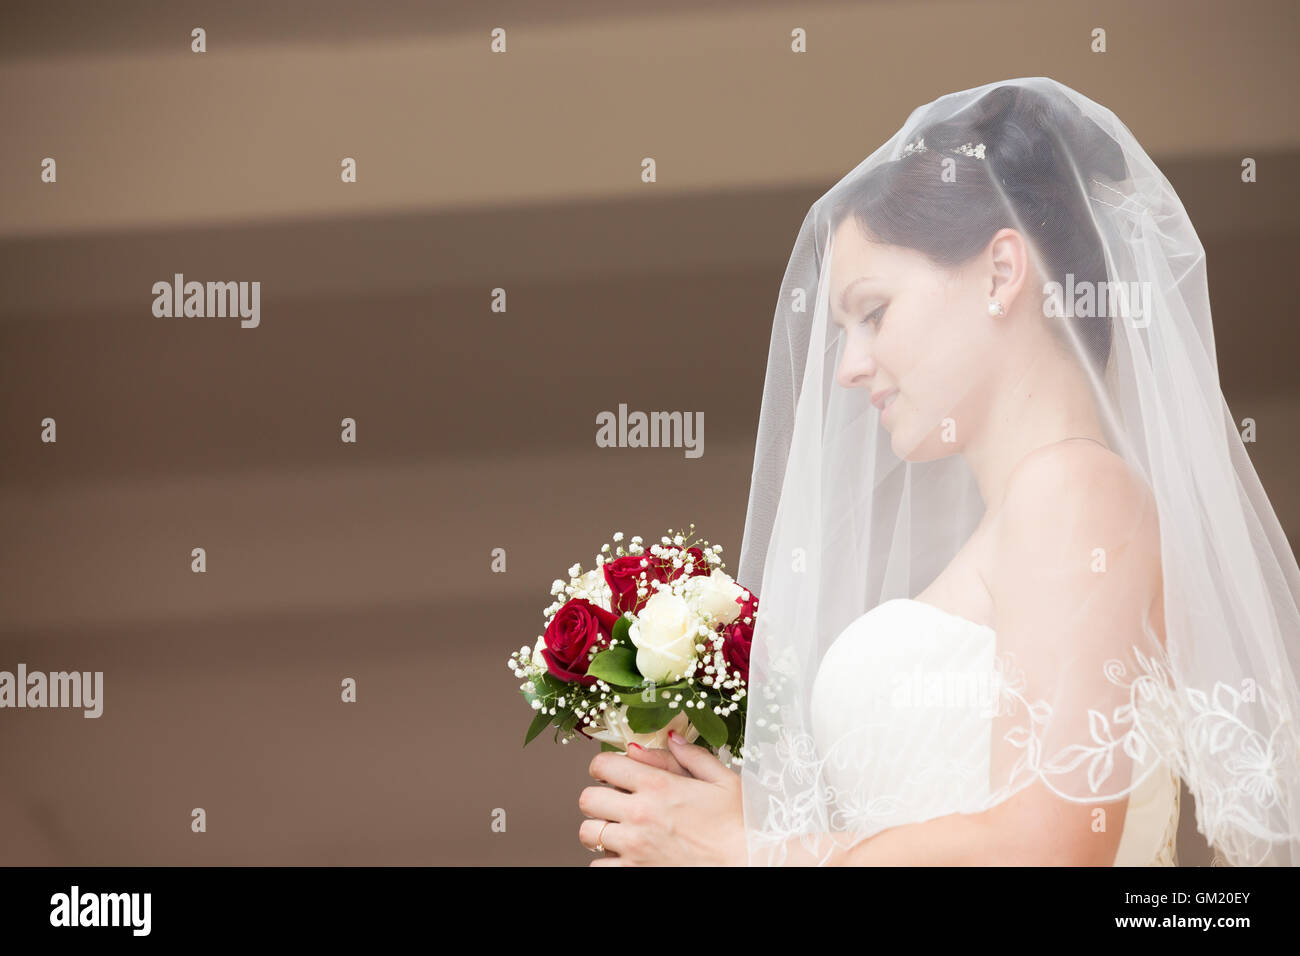 Side view portrait of young beautiful bride posing with her eyes down, holding bridal bouquet with white and red roses Stock Photo